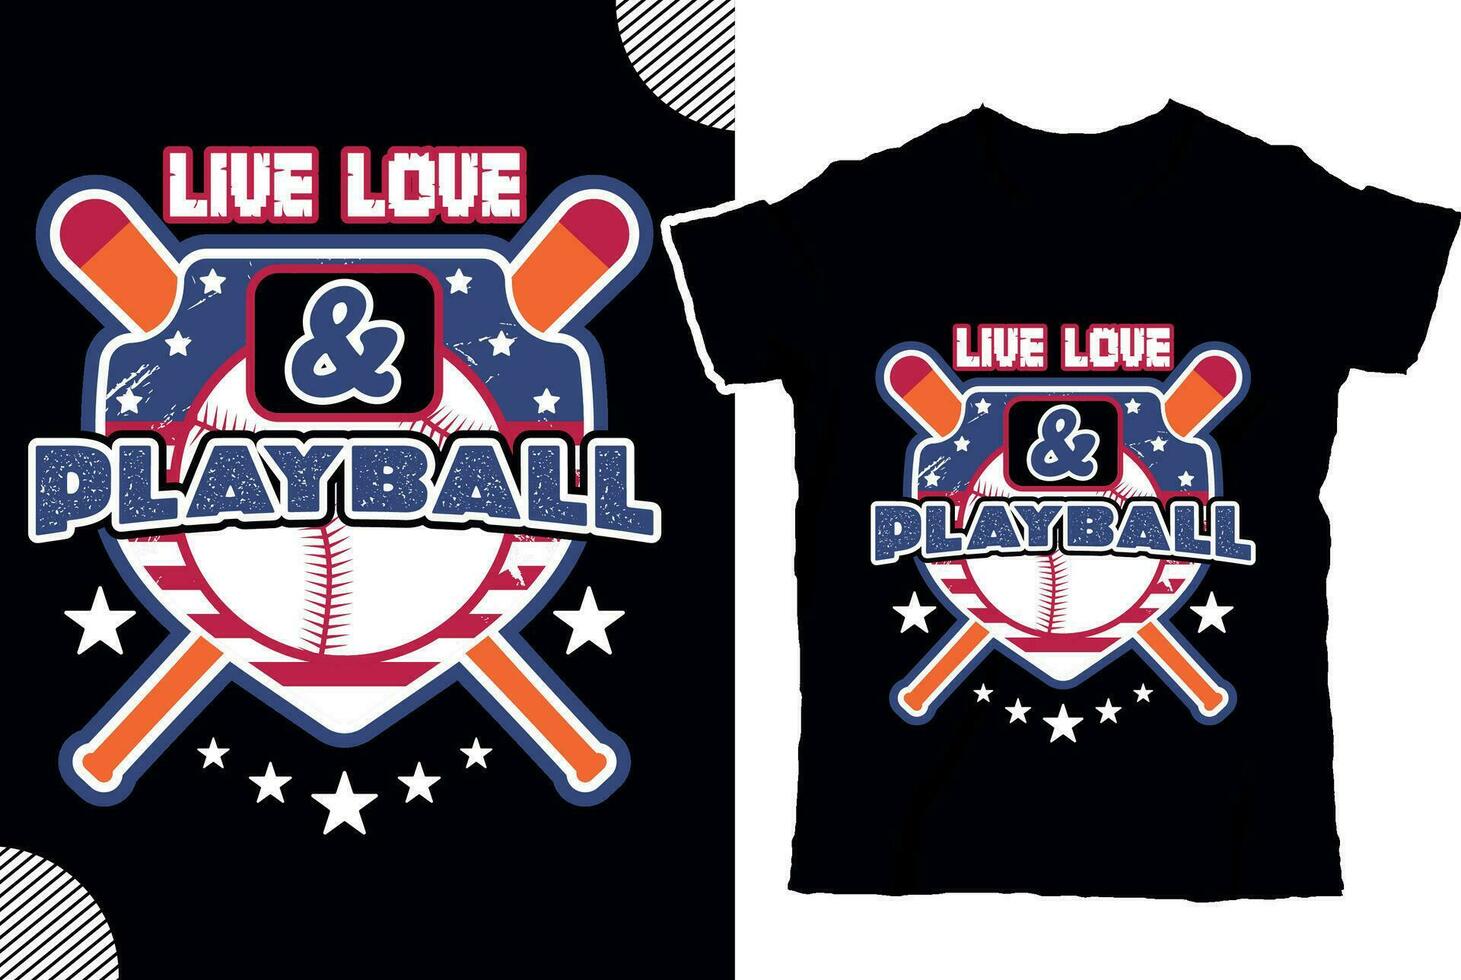 Live love and playball vector t shirt design